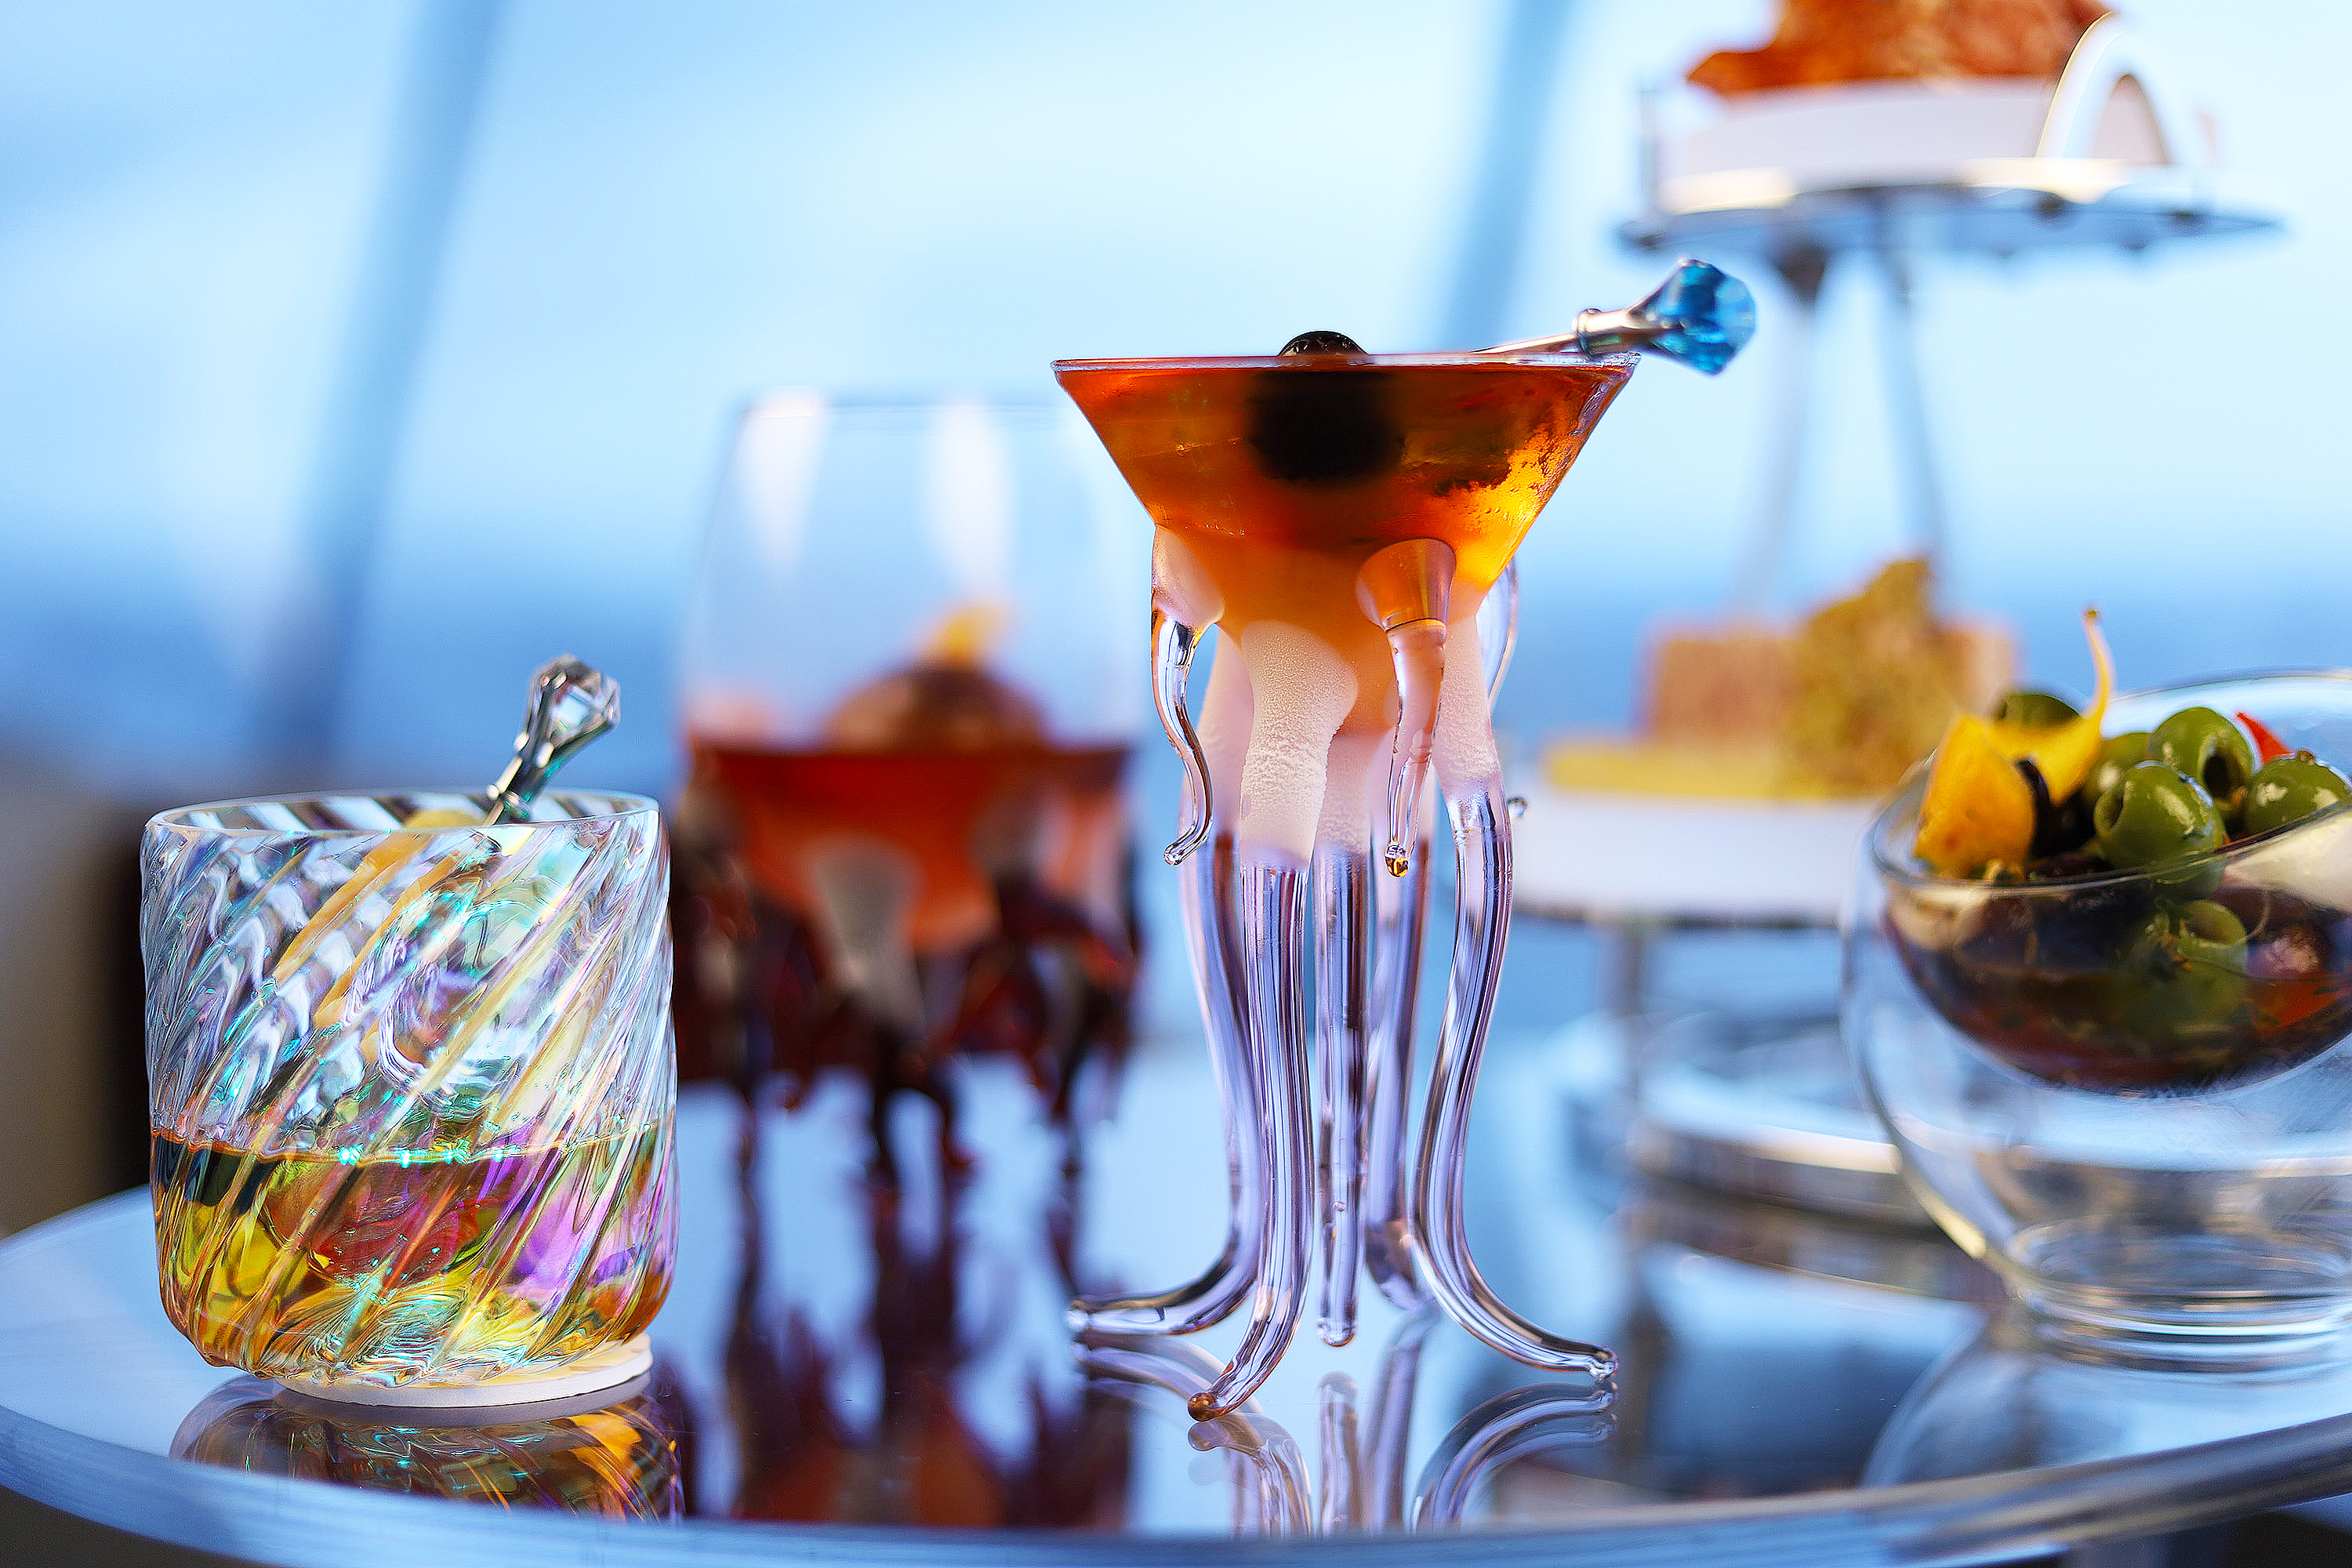 From the lounge at the top of the Space Needle, a view of several cocktails, including one served in a glass that evokes a tentacled sea creature